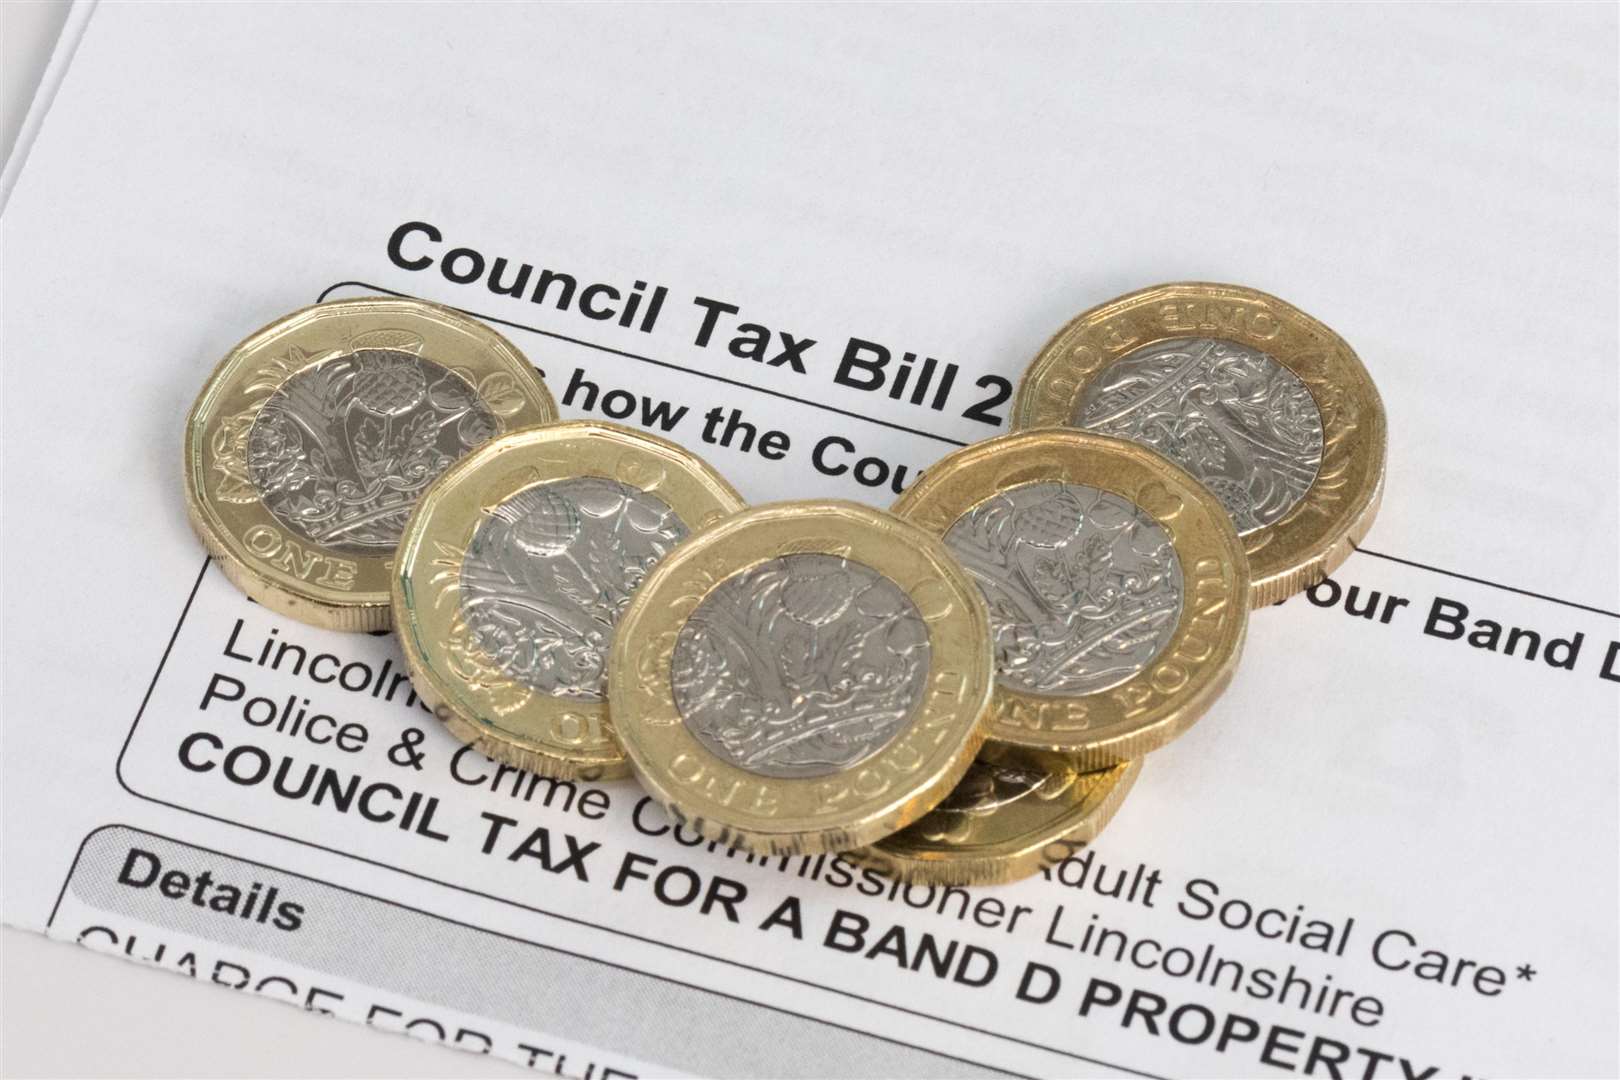 Those who pay their council tax via direct debit will receive a one-off payment of £150 from their council in April